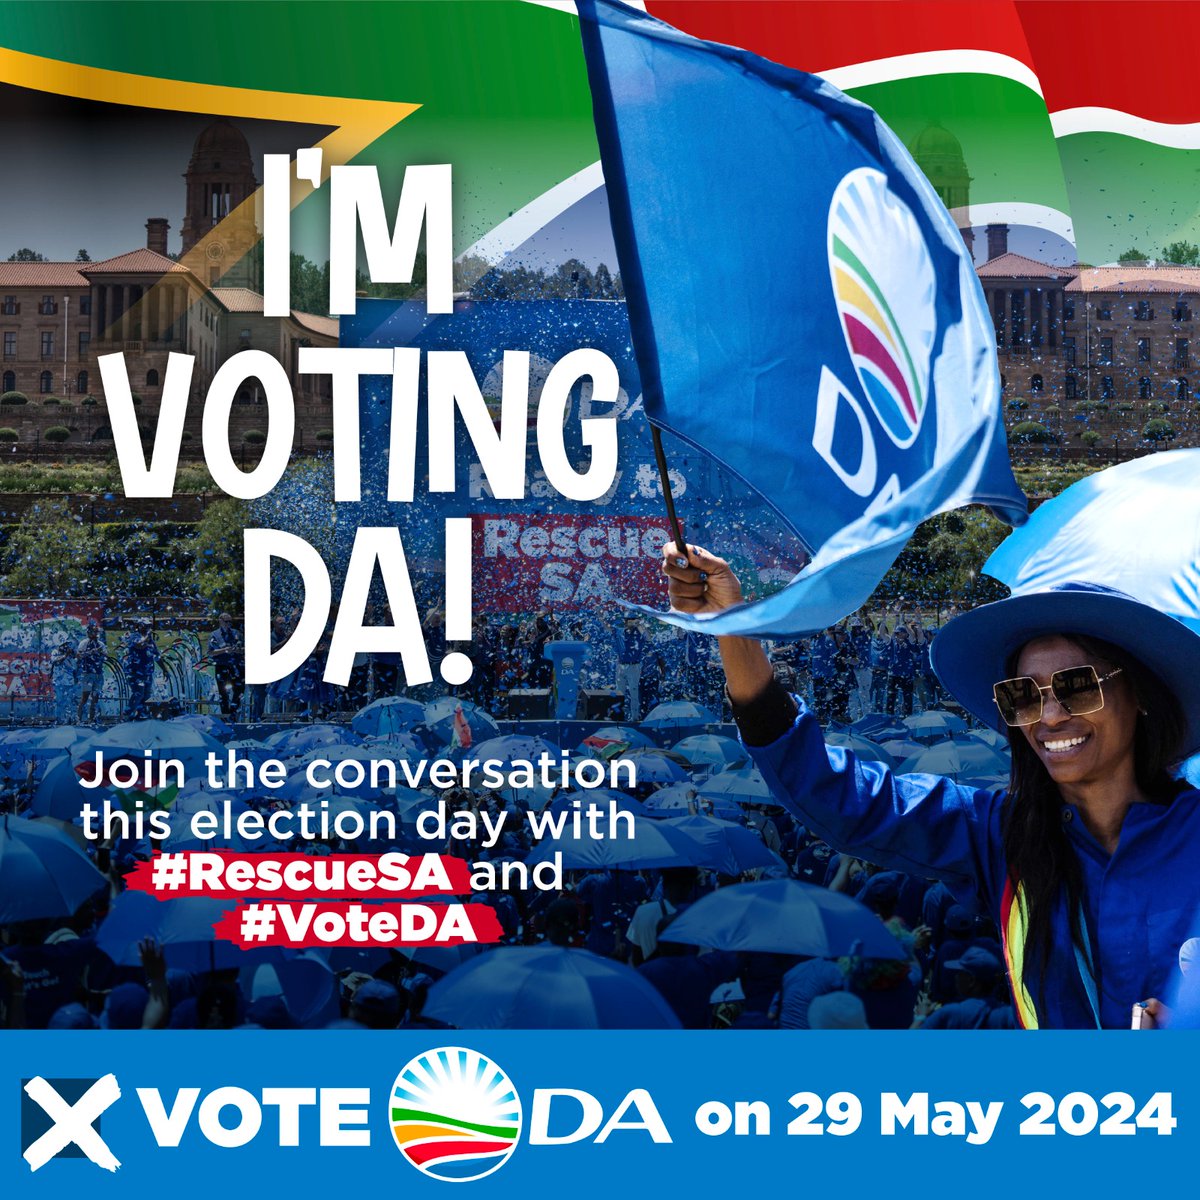 🇿🇦 This election is all or nothing. The stakes are too high to stay home. On 28 & 29 May, vote with our country in mind. Share your voting pic with #RescueSA and #VoteDA. A strong DA can Rescue SA. #VoteDA!